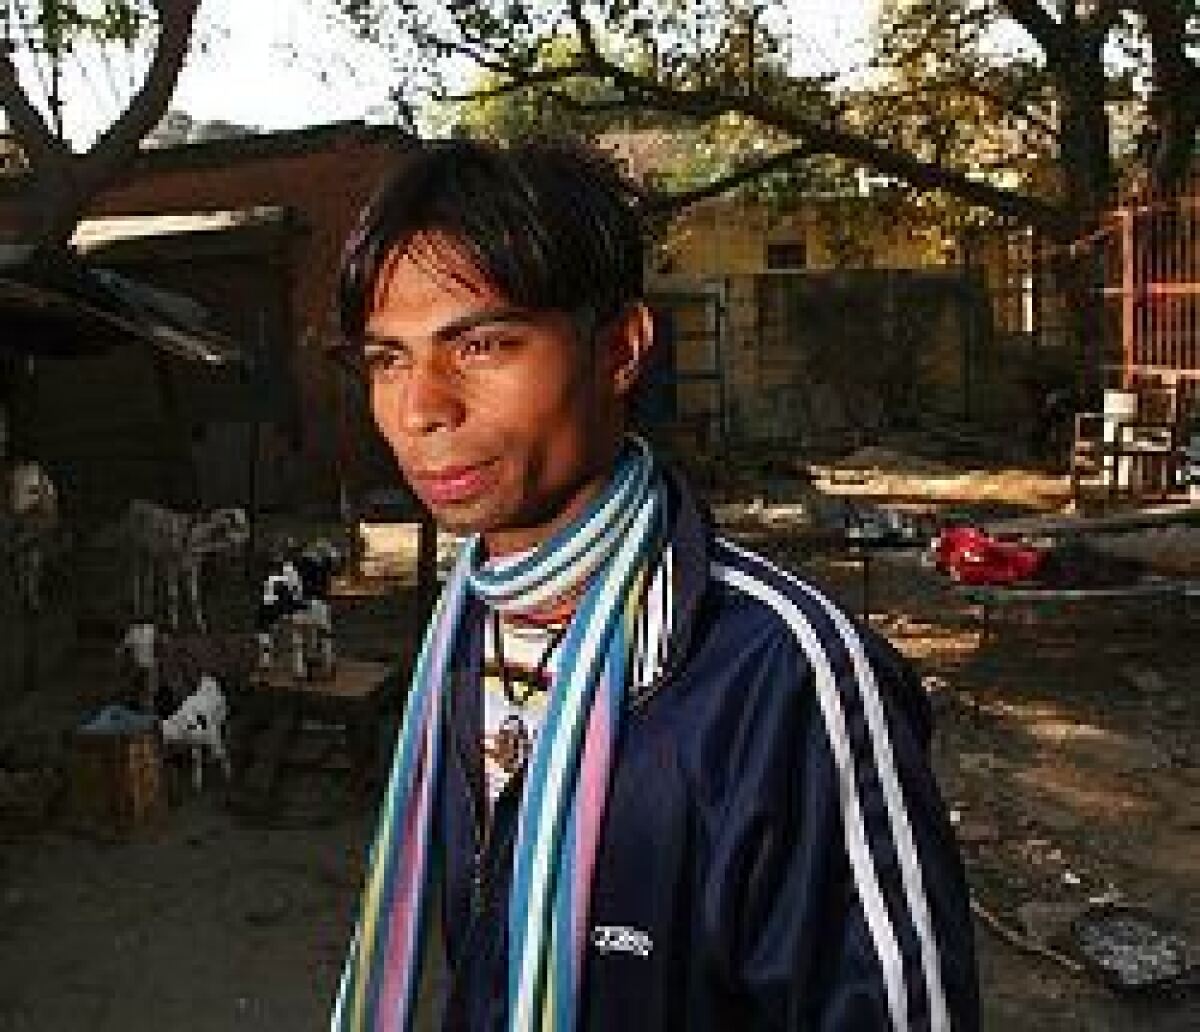 Shekhar Sahni, 21, ran away from his home in eastern India at the age of 12, ending up in New Delhi, living at the railway station and becoming a "rag-picker"  scavenging among refuse heaps for recyclables to sell. In his teens he fell into drugs, but has lately kicked the habit and is working at the charity that helped him.